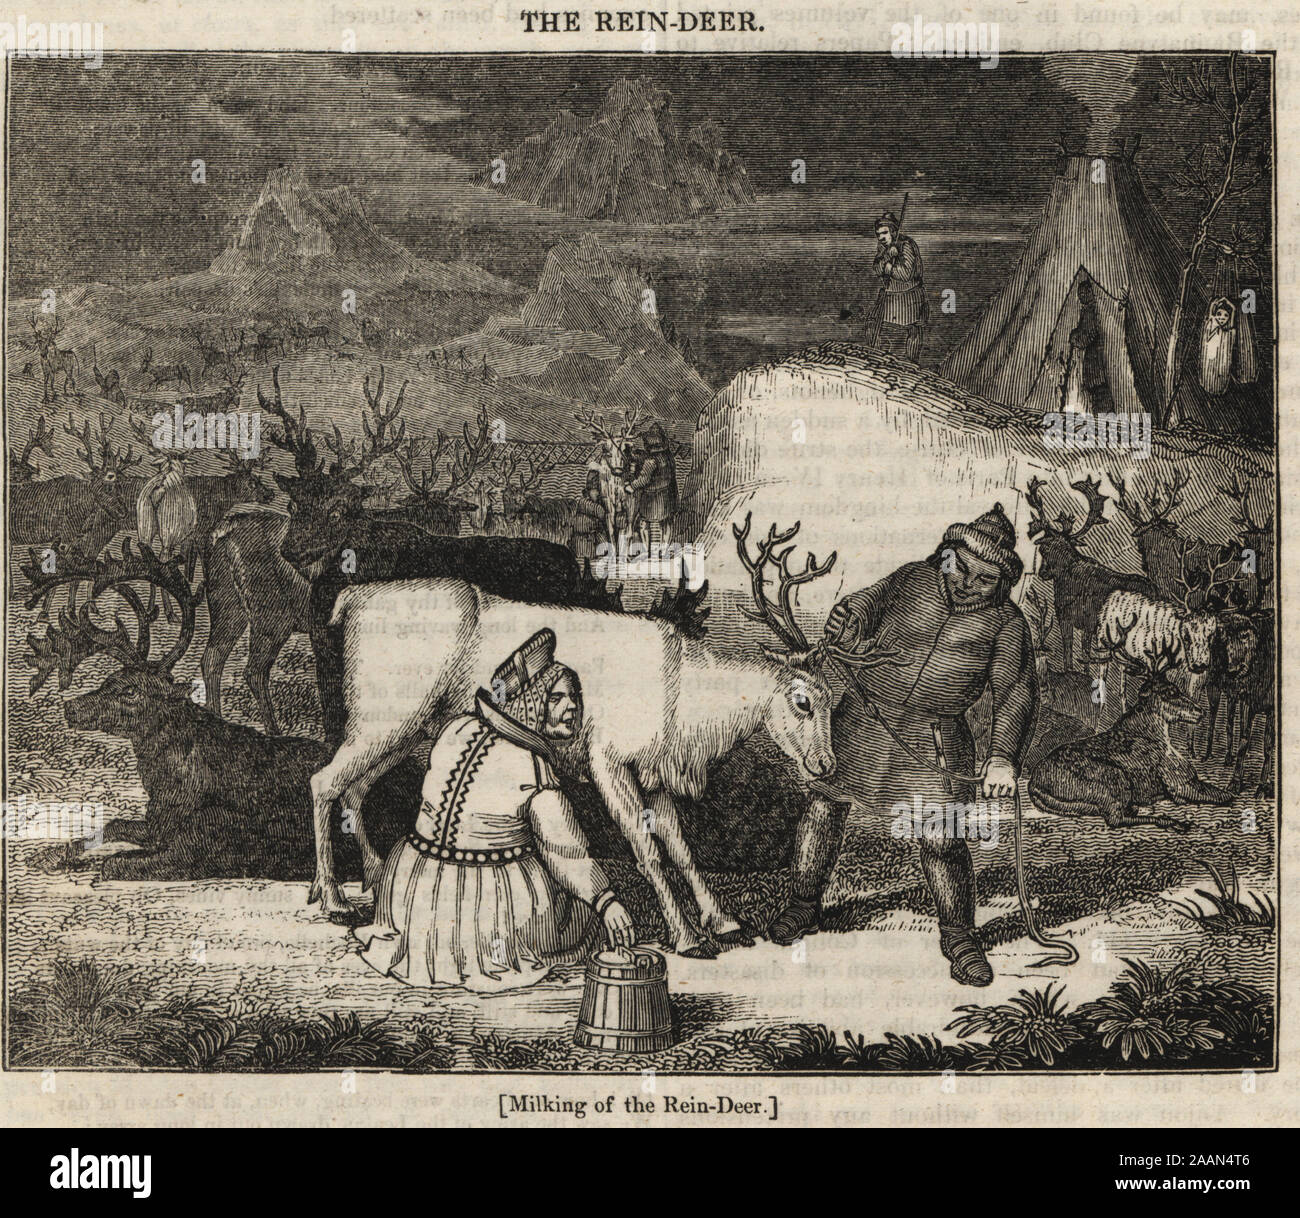 Laplanders or Sami people milking reindeer, Rangifer tarandus, in front of a lavvu (tent). Woodblock engraving from The Penny Magazine, of the Society for the Diffusion of Useful Knowledge, printed by William Clowes, Lambeth, 1833. Stock Photo